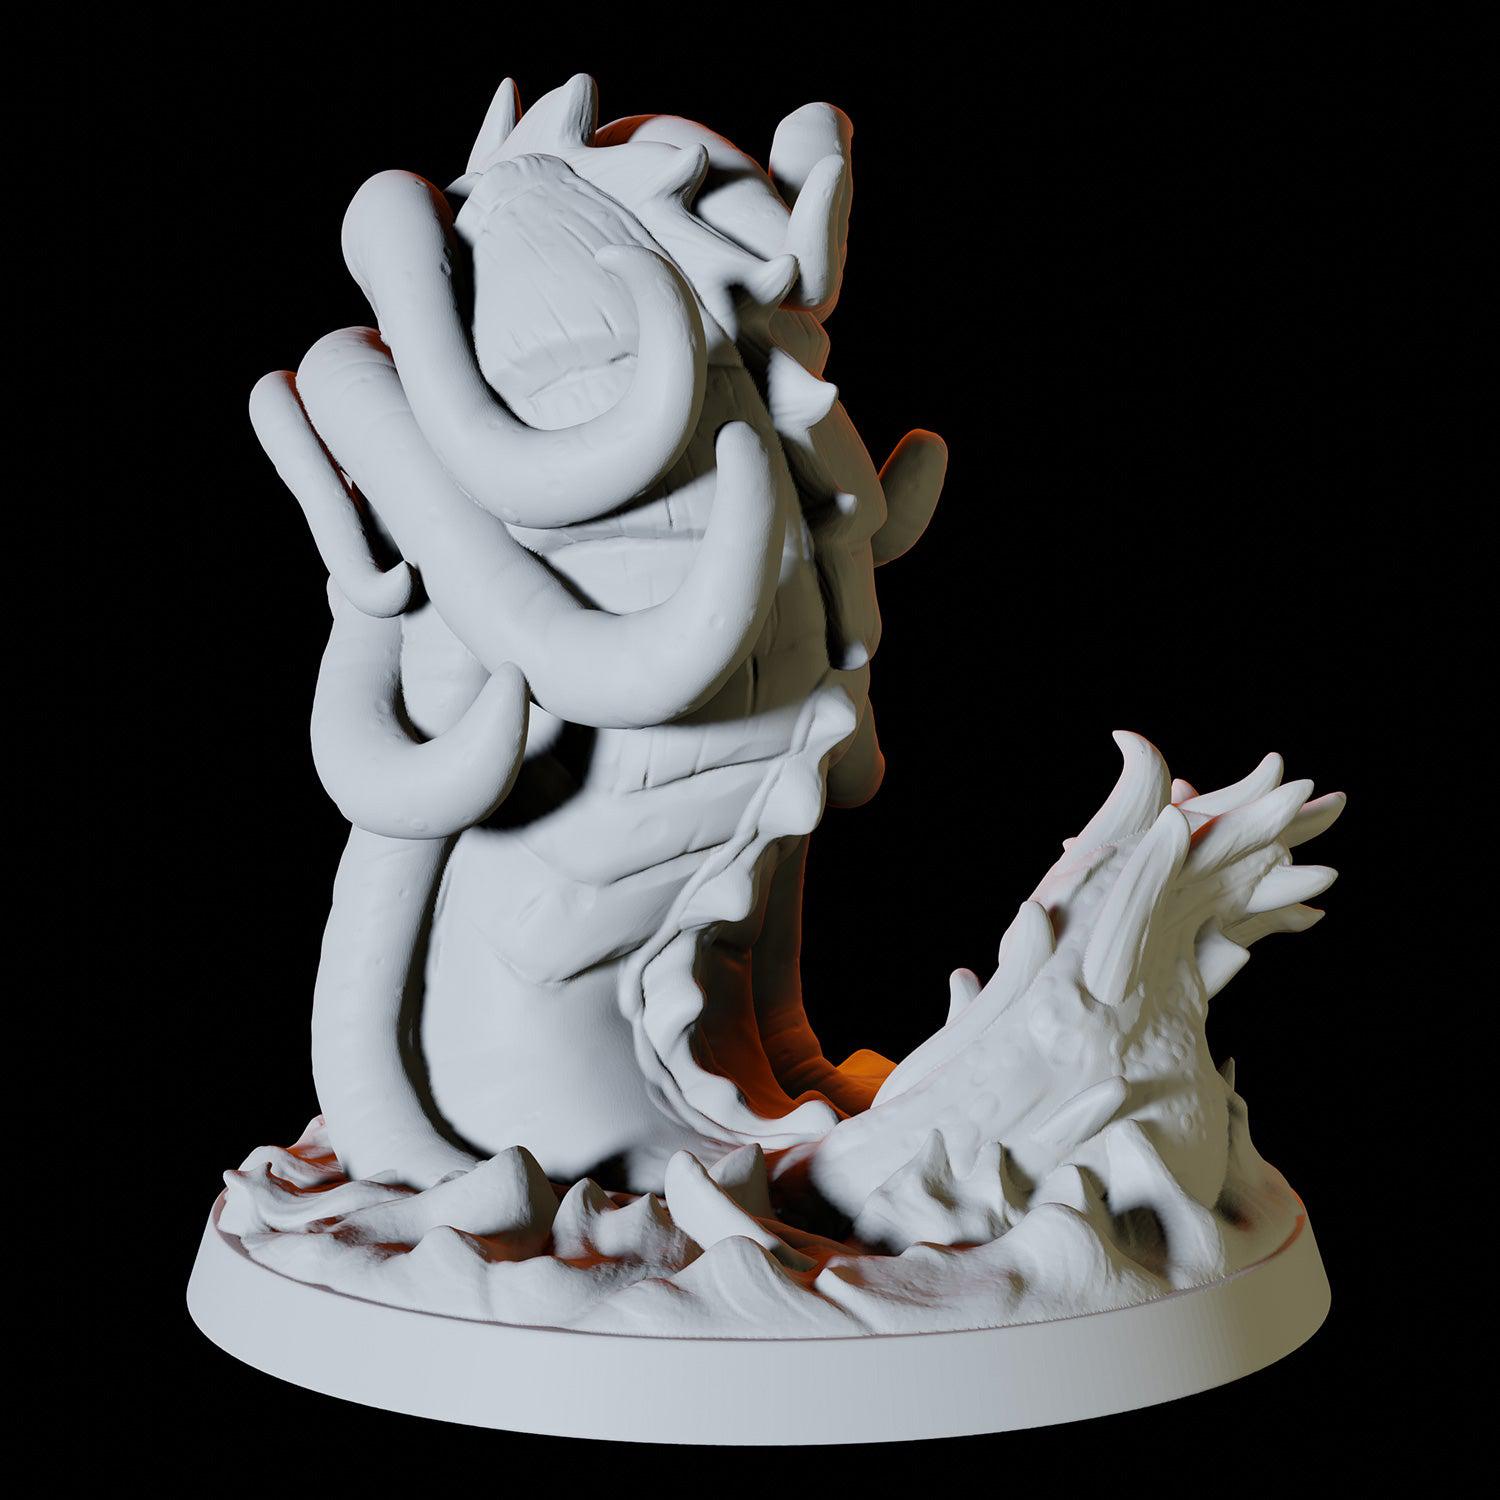 Aboleth Miniature for Dungeons and Dragons - Myth Forged